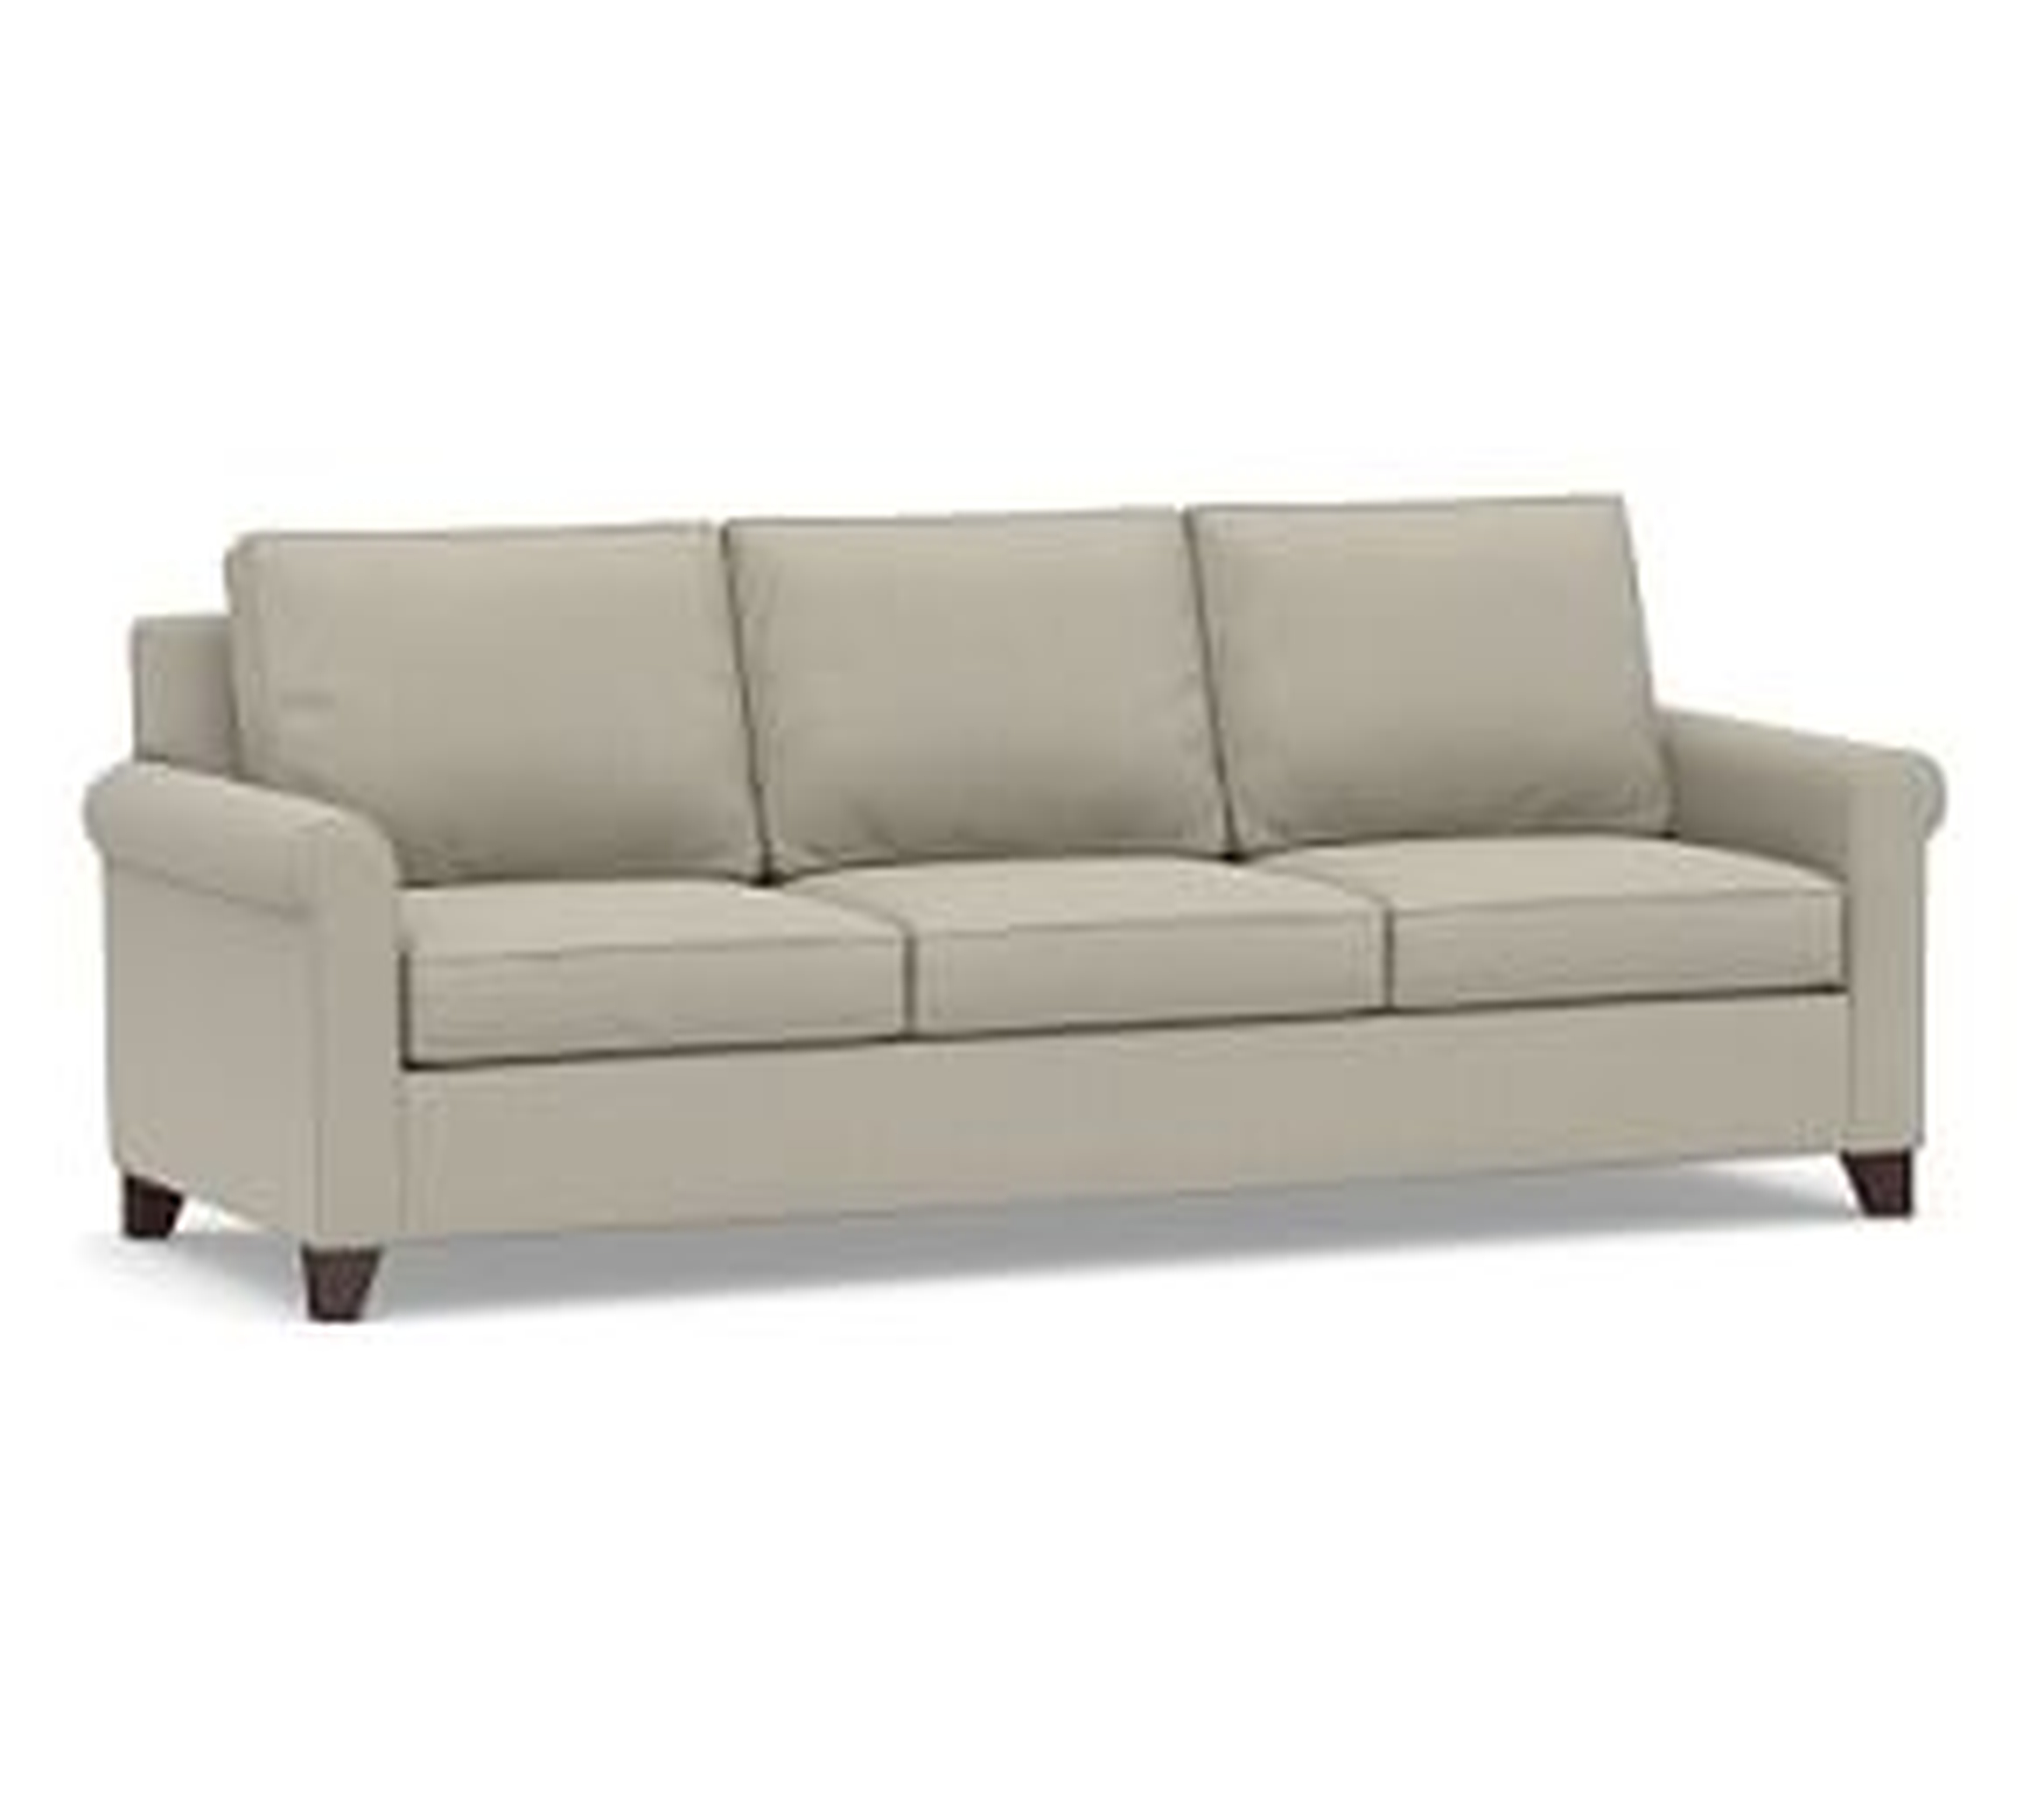 Cameron Roll Arm Upholstered Sofa 88" 3-Seater, Polyester Wrapped Cushions, Performance Everydaylinen(TM) Oatmeal - Pottery Barn